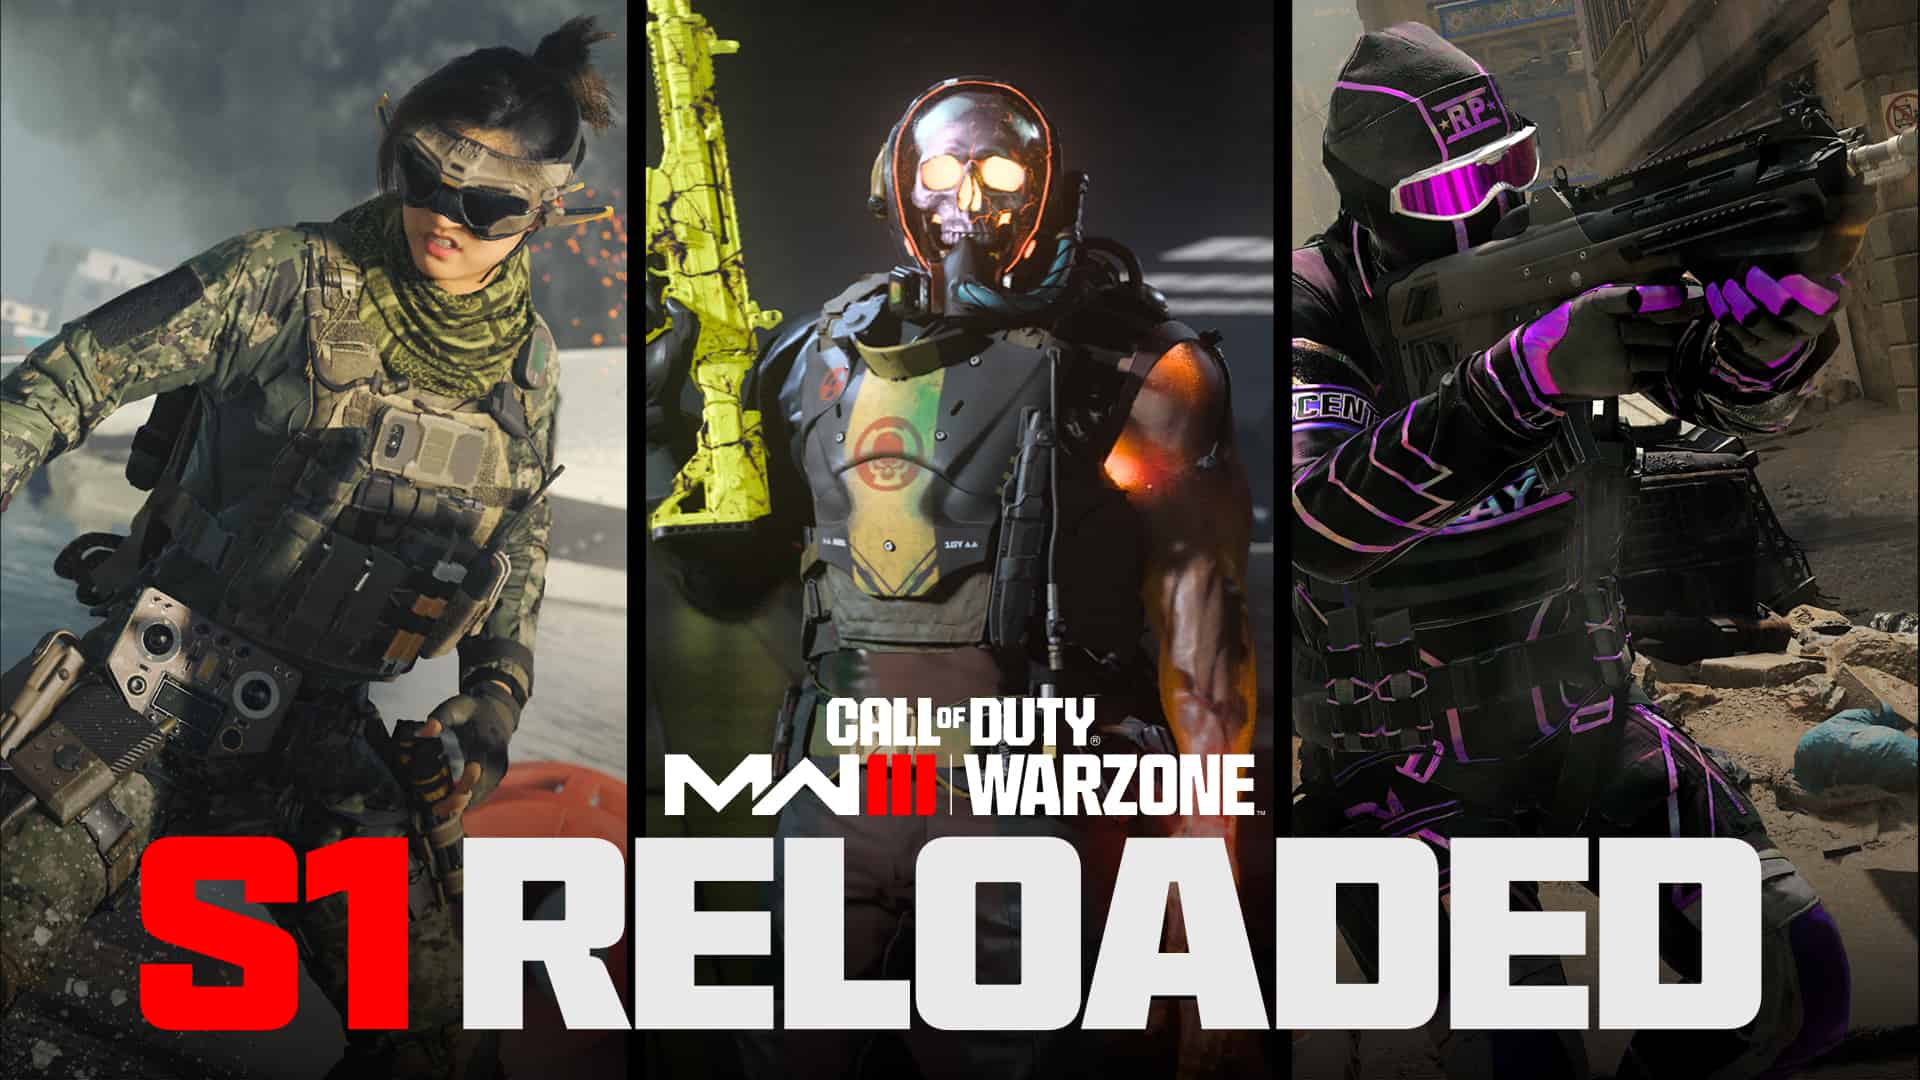 The cover of MW3 Season 1 Reloaded bundles.